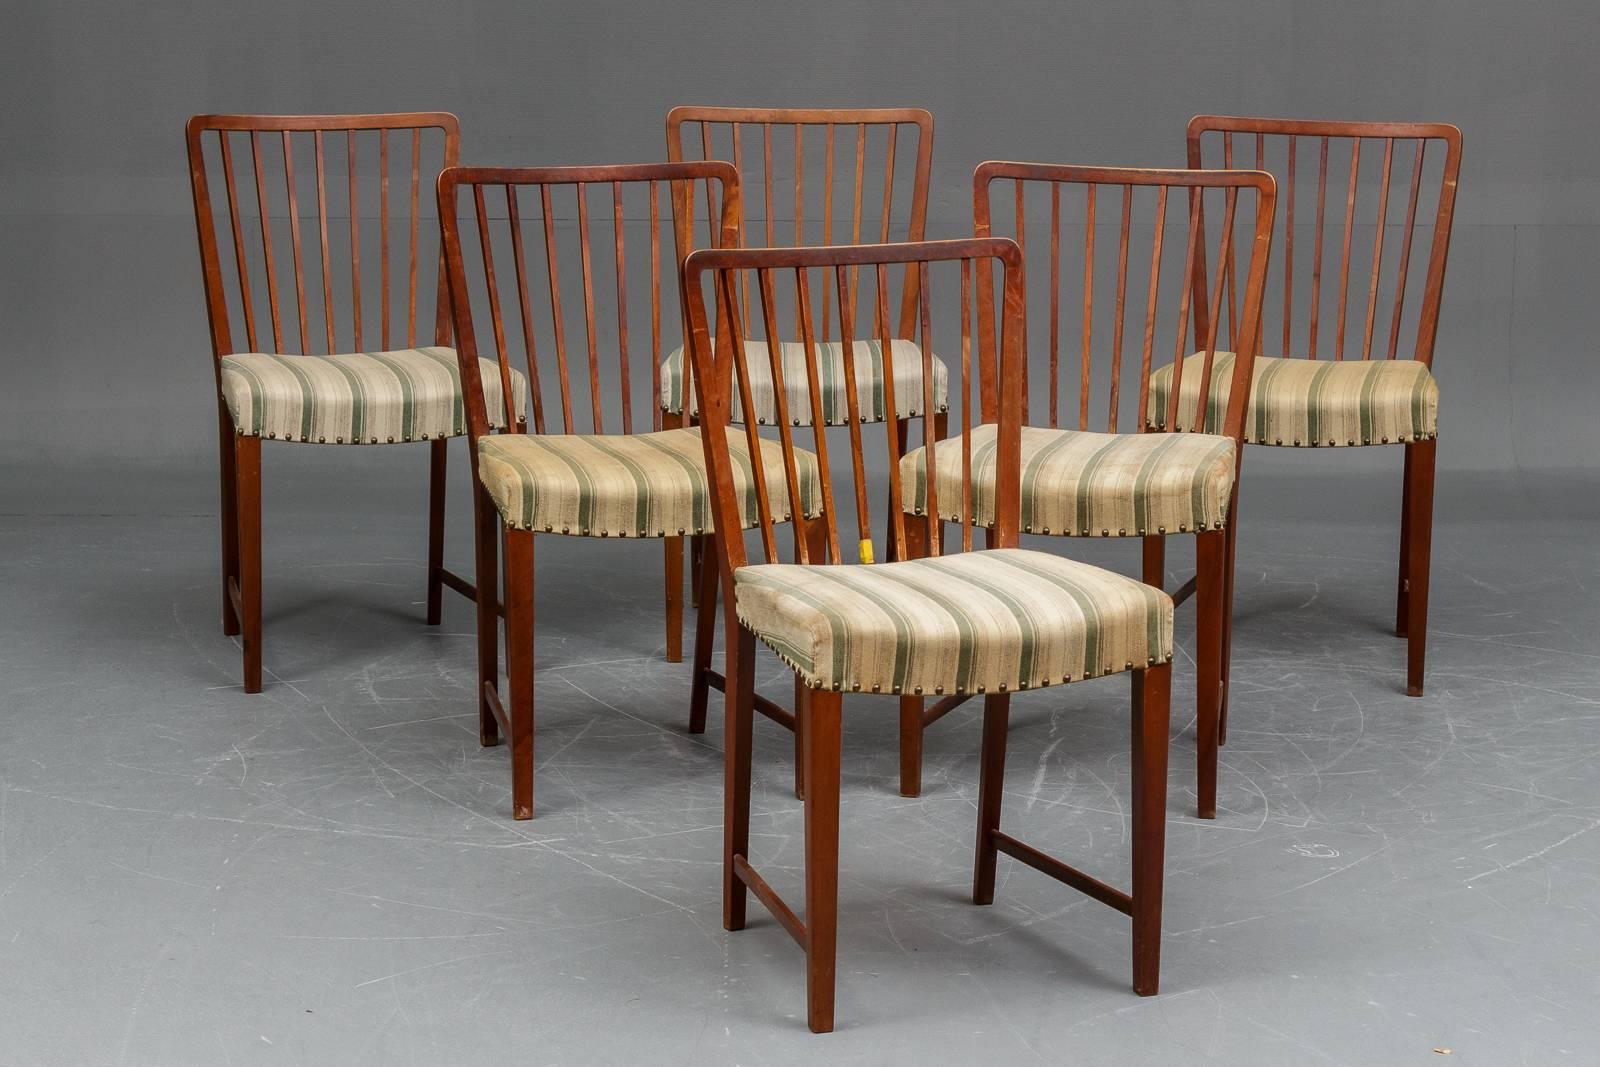 Walnut wood construction upholstered. Designed by Ole Wanscher for Fritz Hansen in the 1940s.
Still unrestored so you have the possibility to choose the color of the wood and fabric.
The price incl. complete restoration with upholstery (without